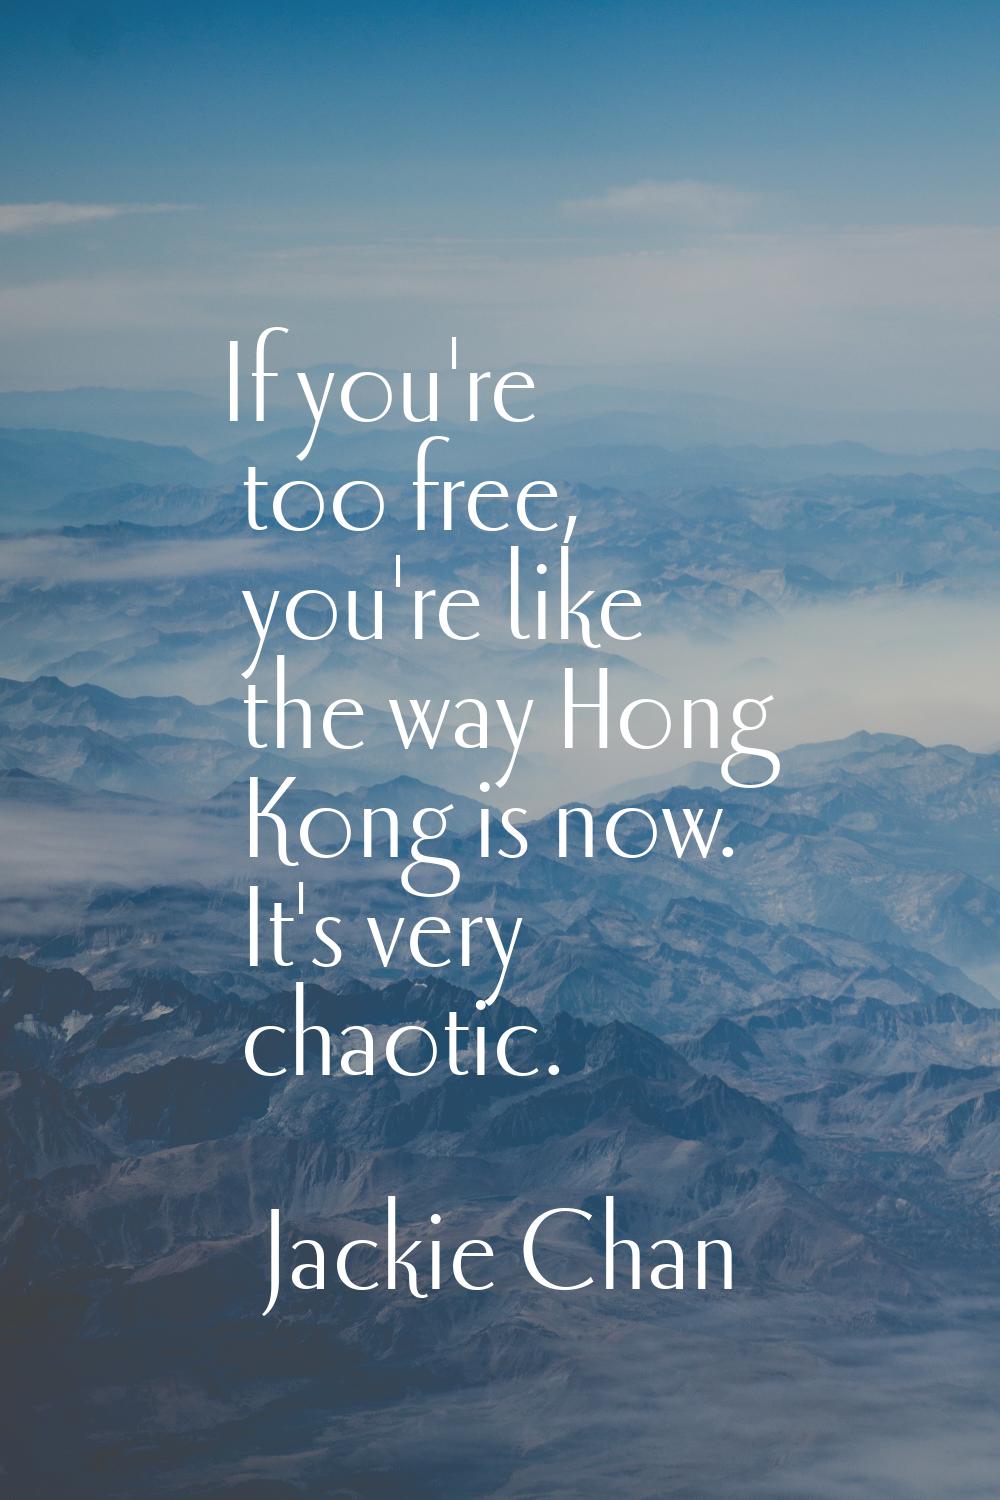 If you're too free, you're like the way Hong Kong is now. It's very chaotic.